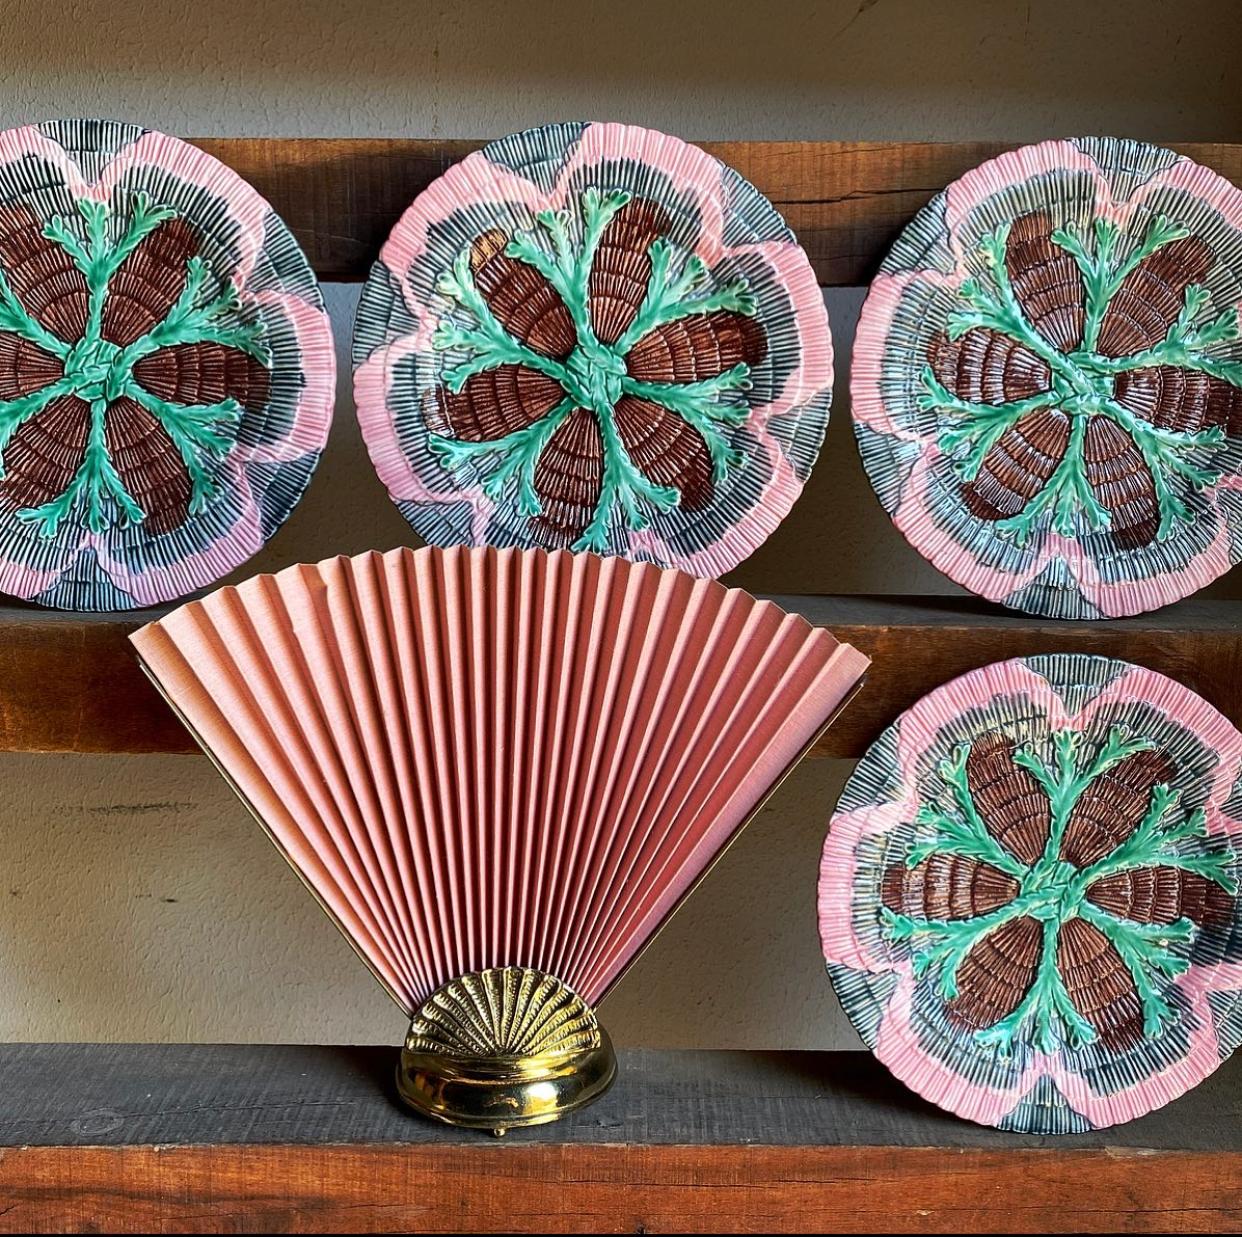 A set of four antique majolica Etruscan plates. Created from ceramic, and glazed in bright pinks, greens, browns, and blacks. Each dish has a fabulous texture and resembles the look of the cult favorite oyster plates that are often hung in groupings